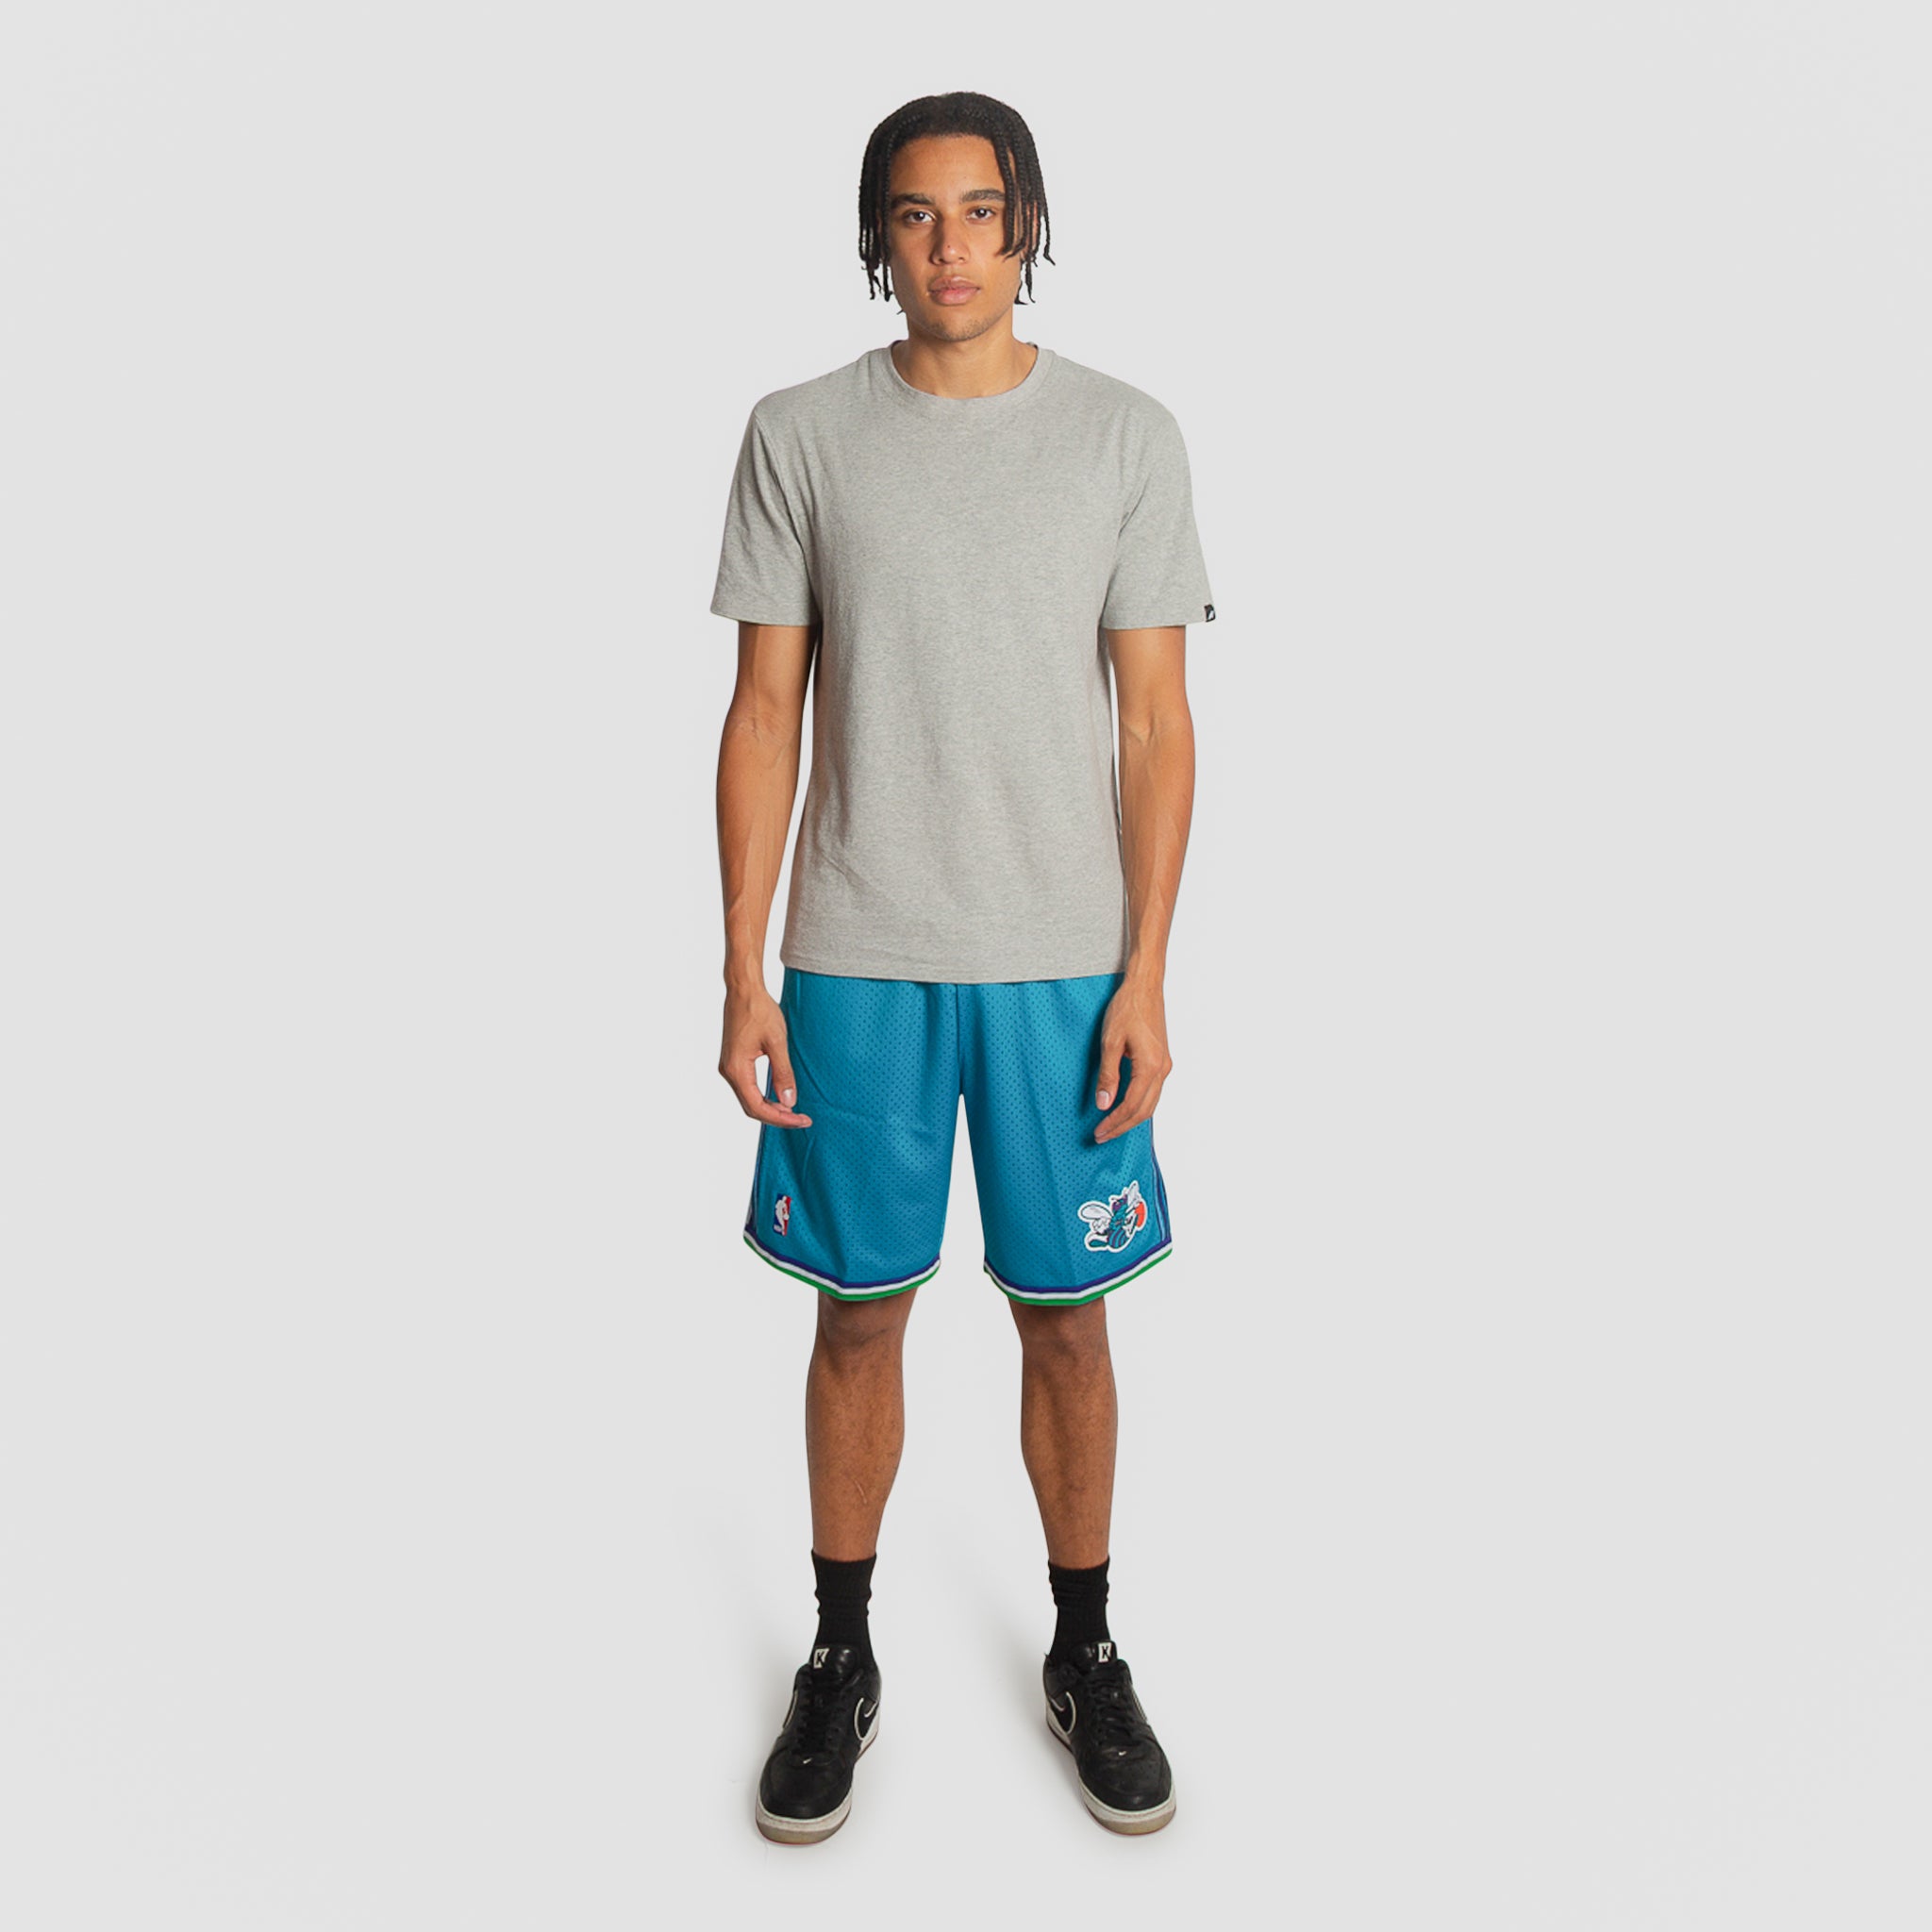 Charlotte Hornets Dri-FIT Play Youth Shorts - Teal - Throwback